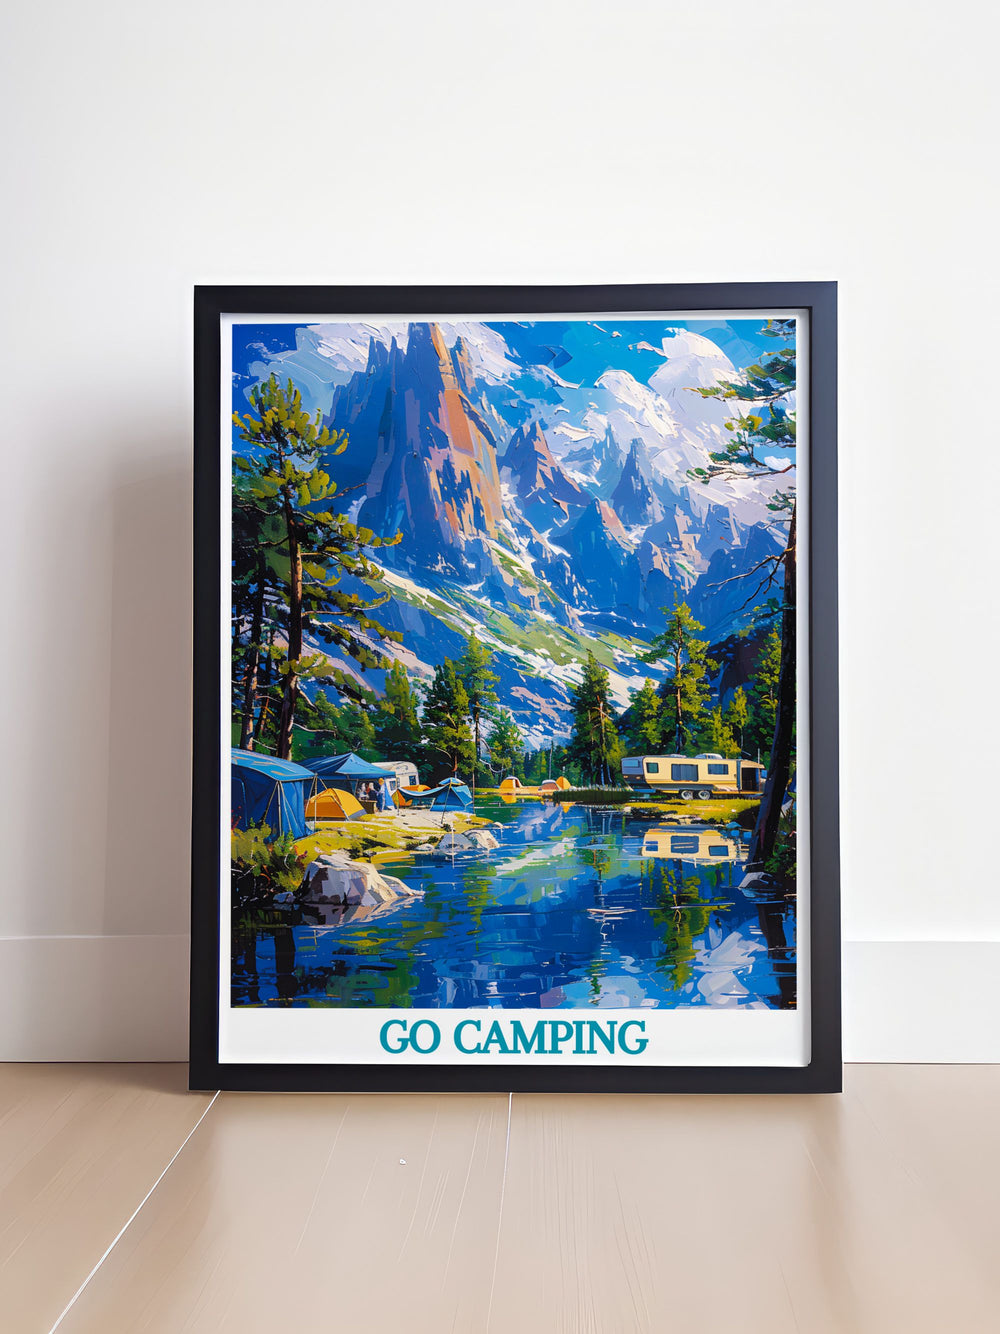 Travel art depicting a cozy camping spot by a mountain range, with a camper van and expansive views, perfect for nature enthusiasts and those who cherish outdoor adventures.